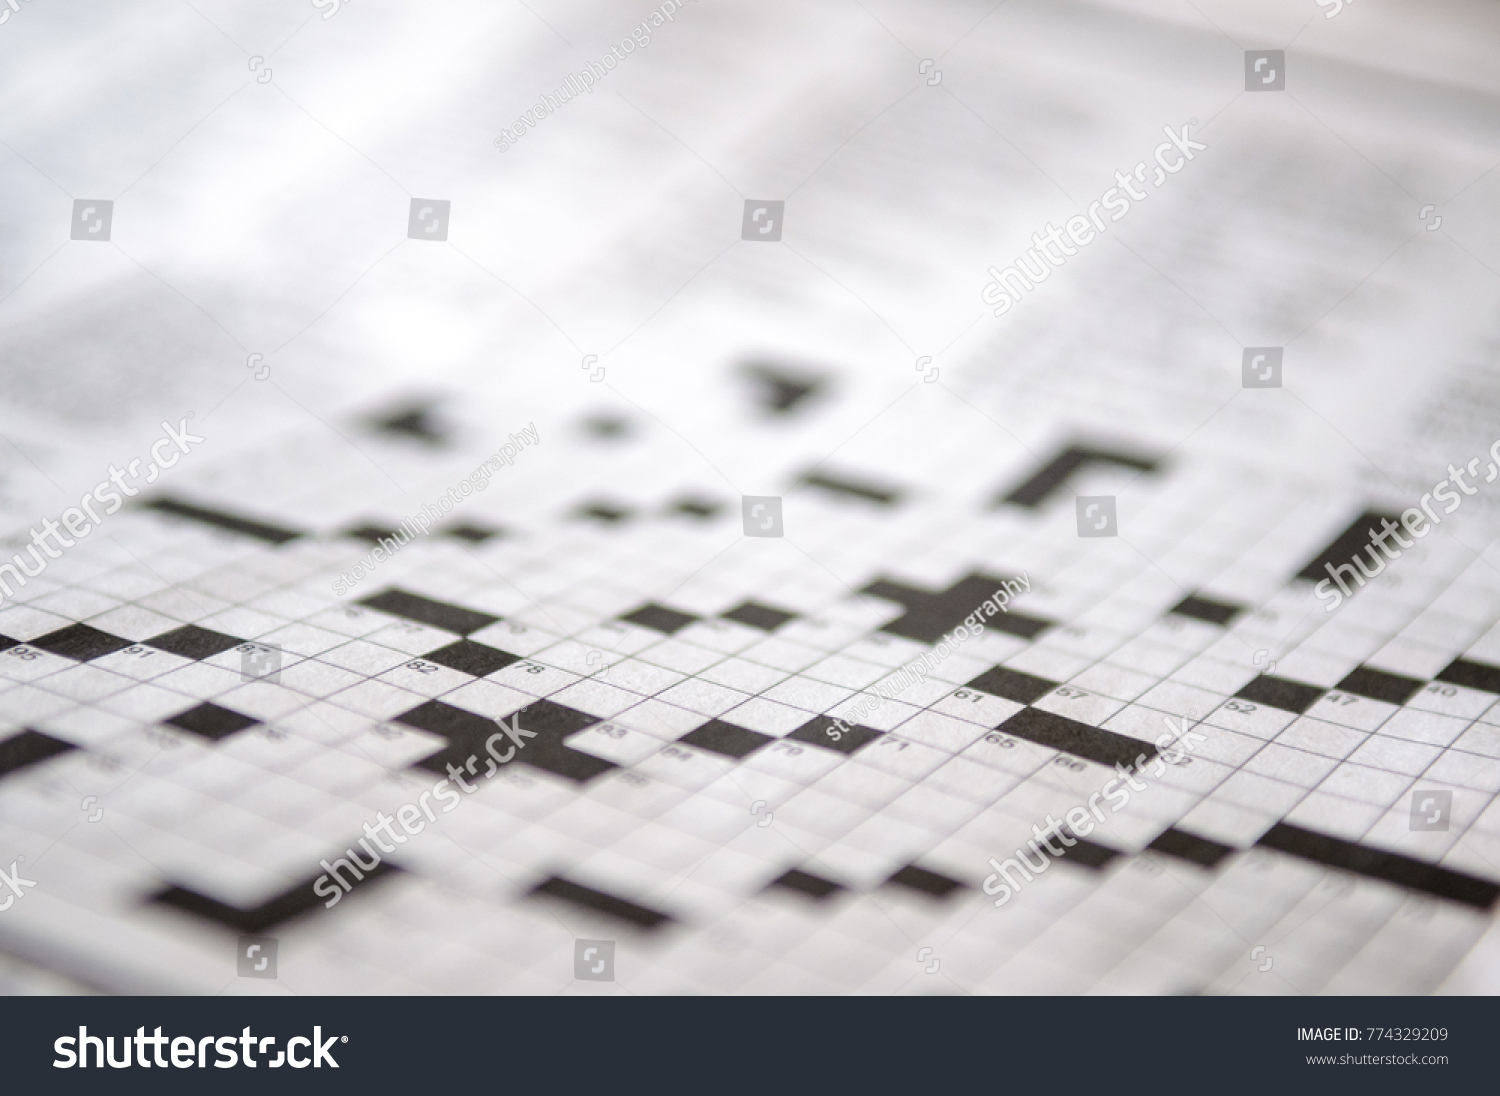 Blank crossword puzzle waiting to be filled in. #774329209